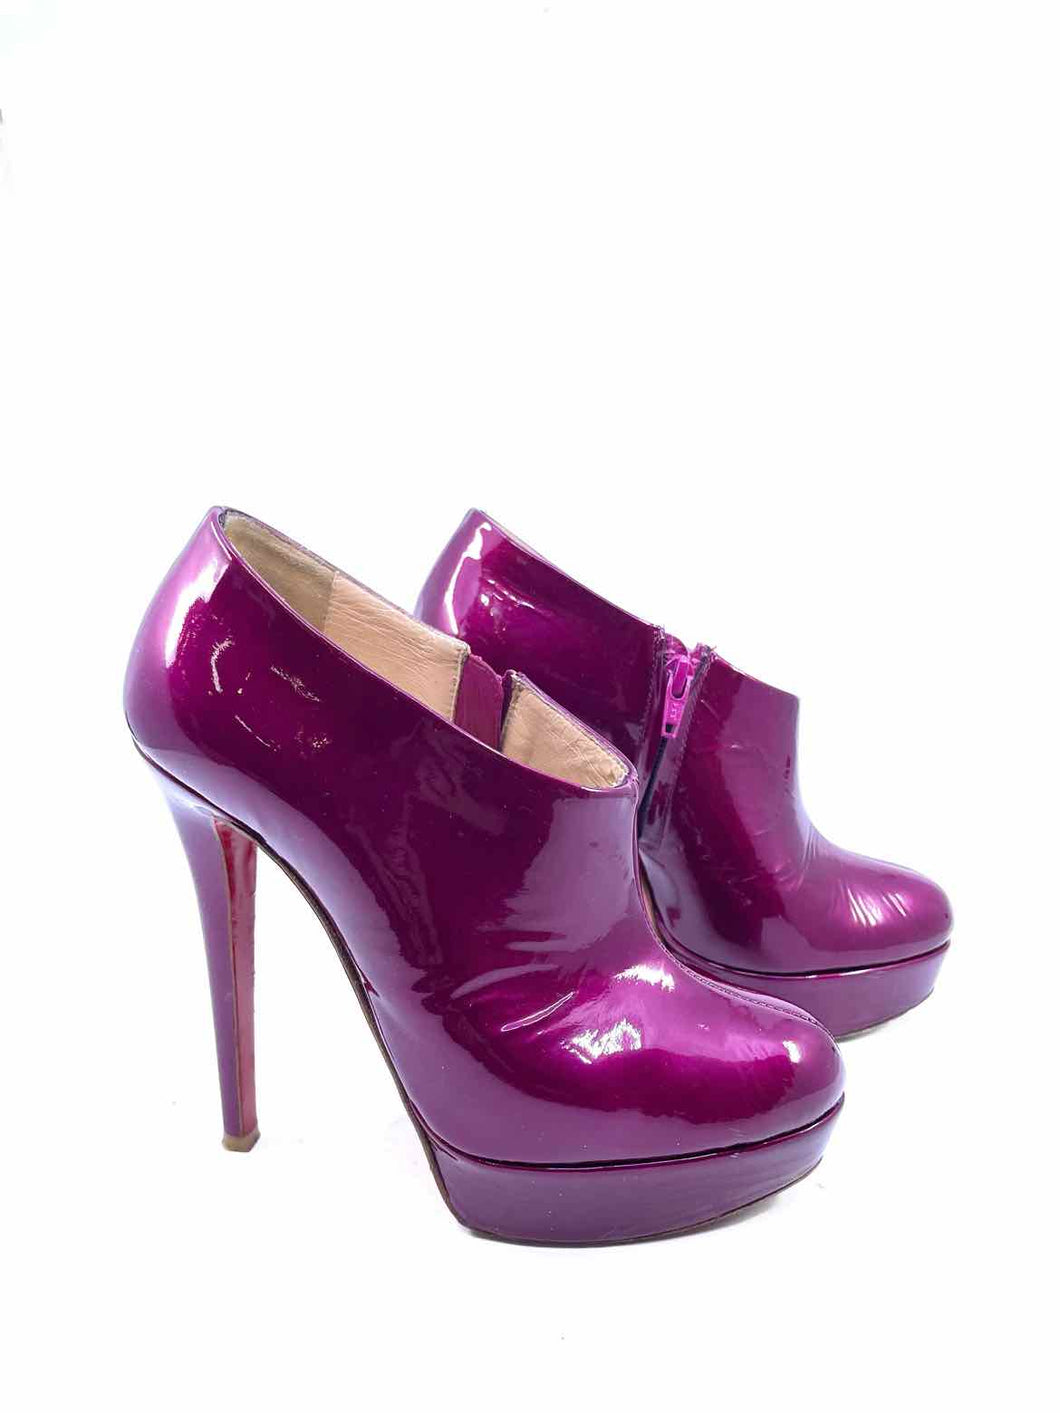 CHRISTIAN LOUBOUTIN Size 6.5 Magenta Patent Leather Iridescent Ankle Boot